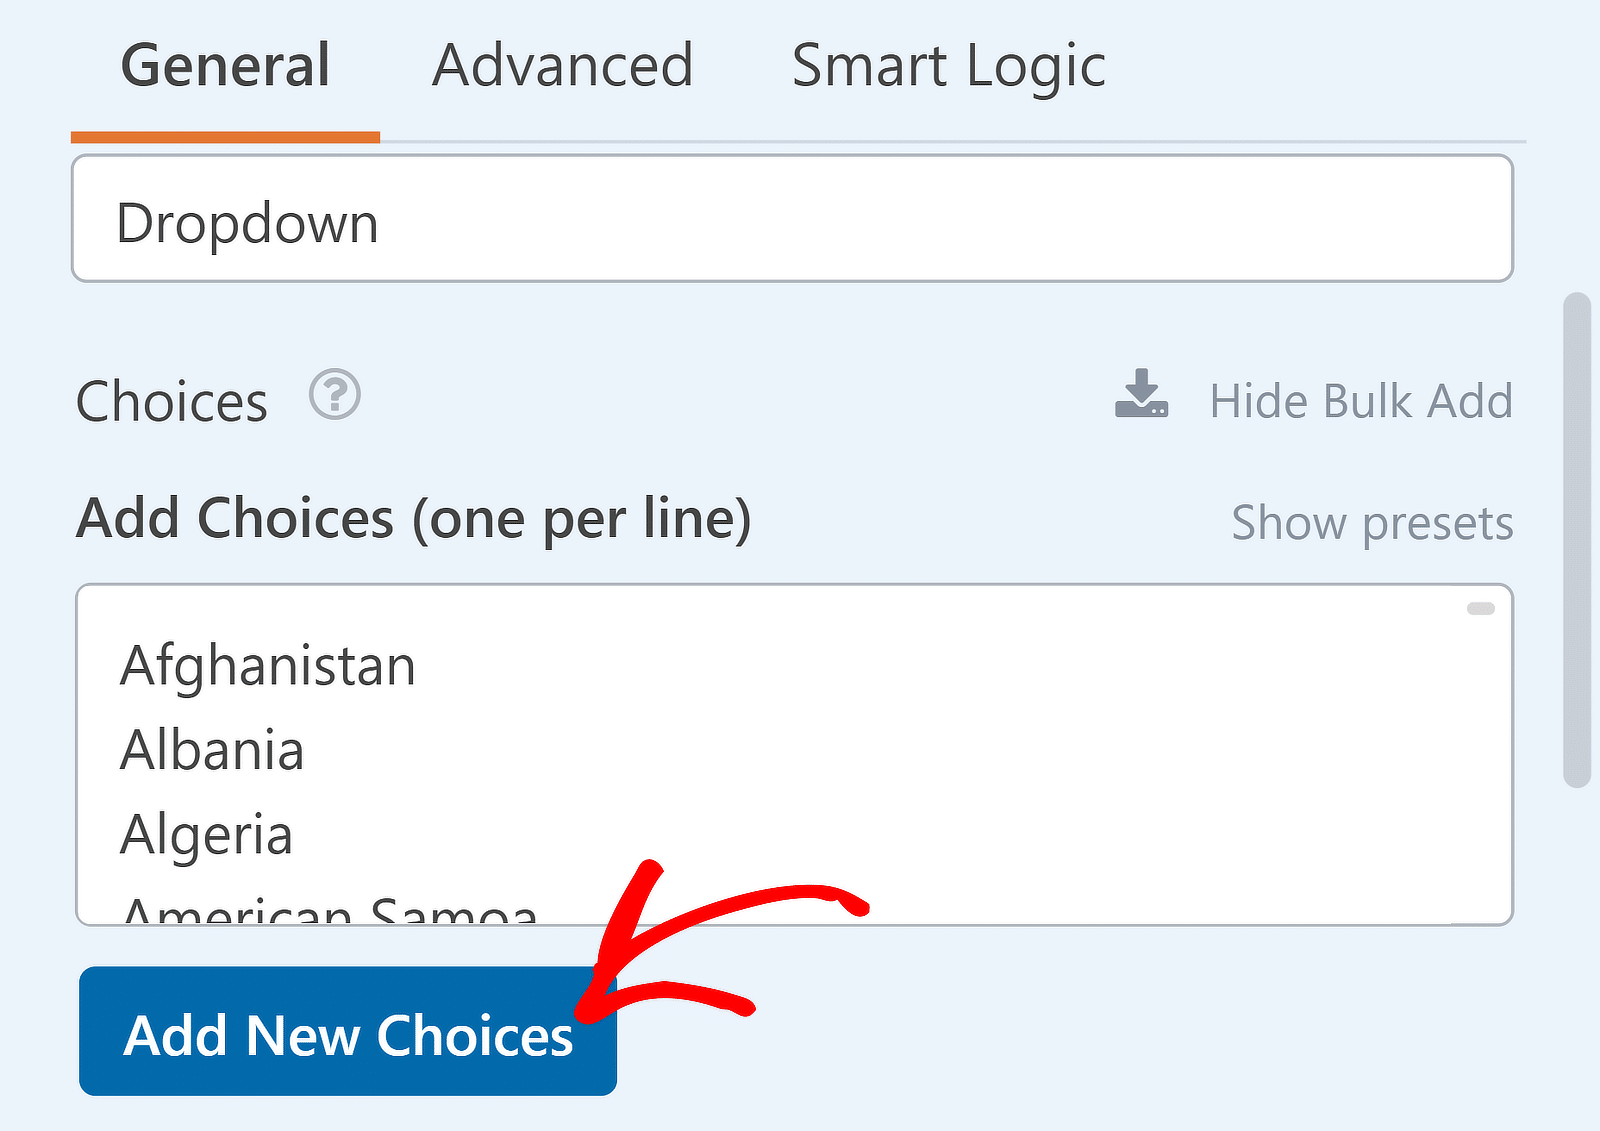 Add new choices